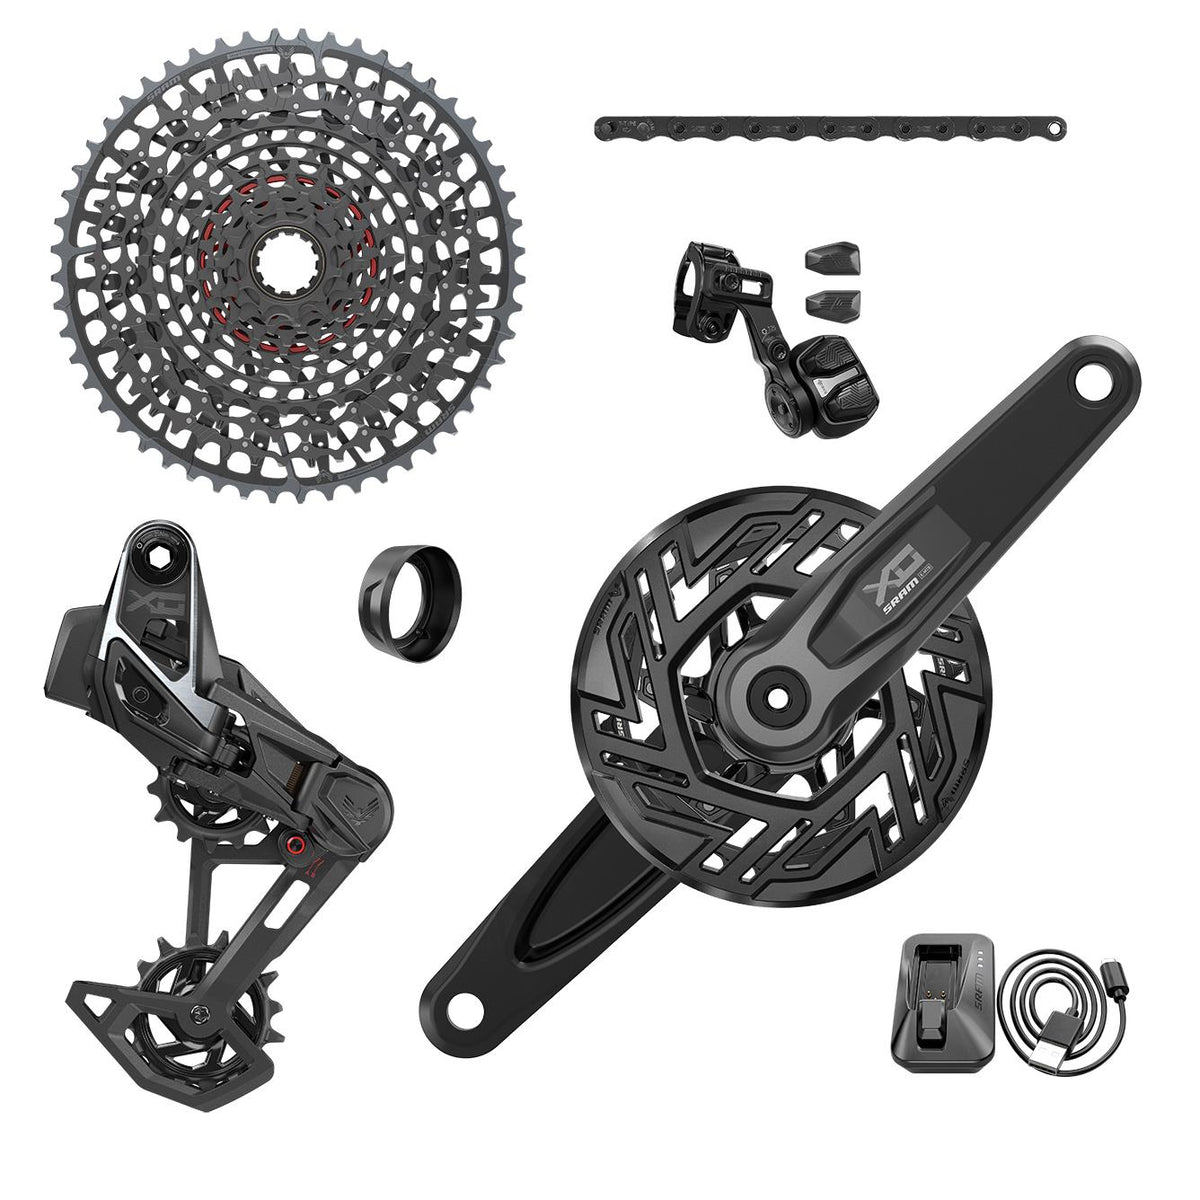 SRAM X0 Eagle T-Type E-MTB 104Bcd Transmission AXS Groupset – Cranks Not Included 